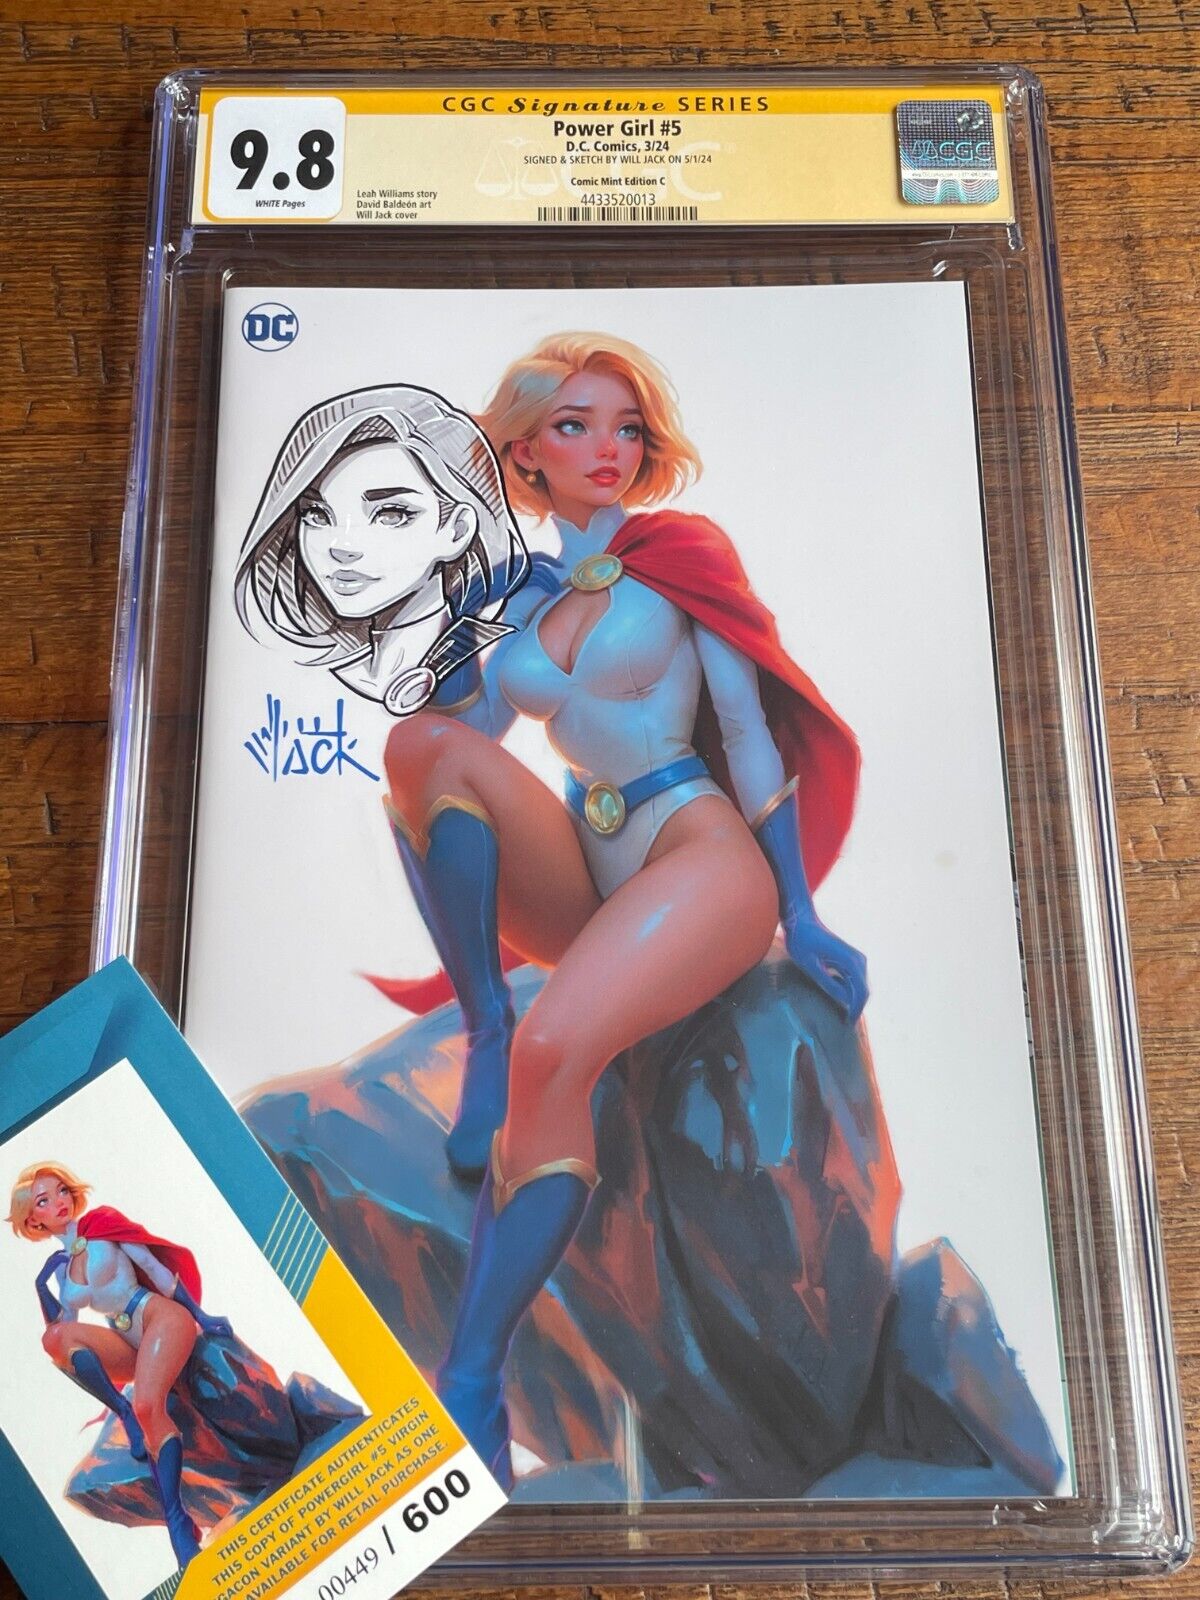 POWER GIRL #5 CGC SS 9.8 WILL JACK REMARK & SIGNED EXCL MEGACON WHITE VARIANT-C